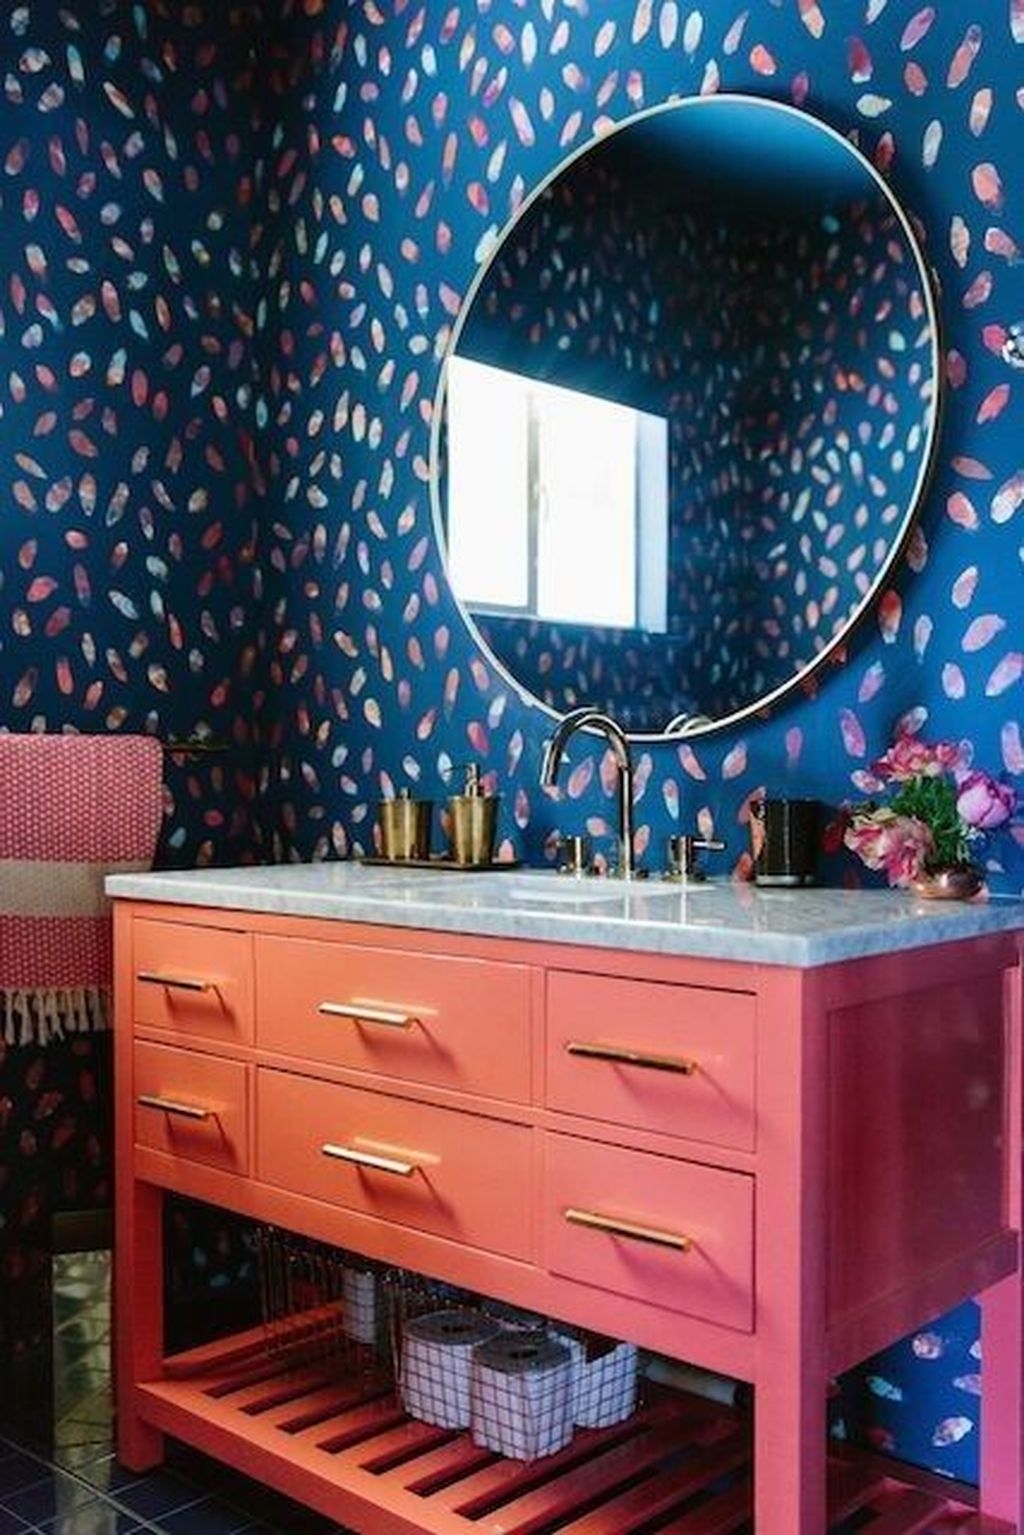 Best Ideas To Bring A Pop Of Bright Color Into Your Interior Design 14